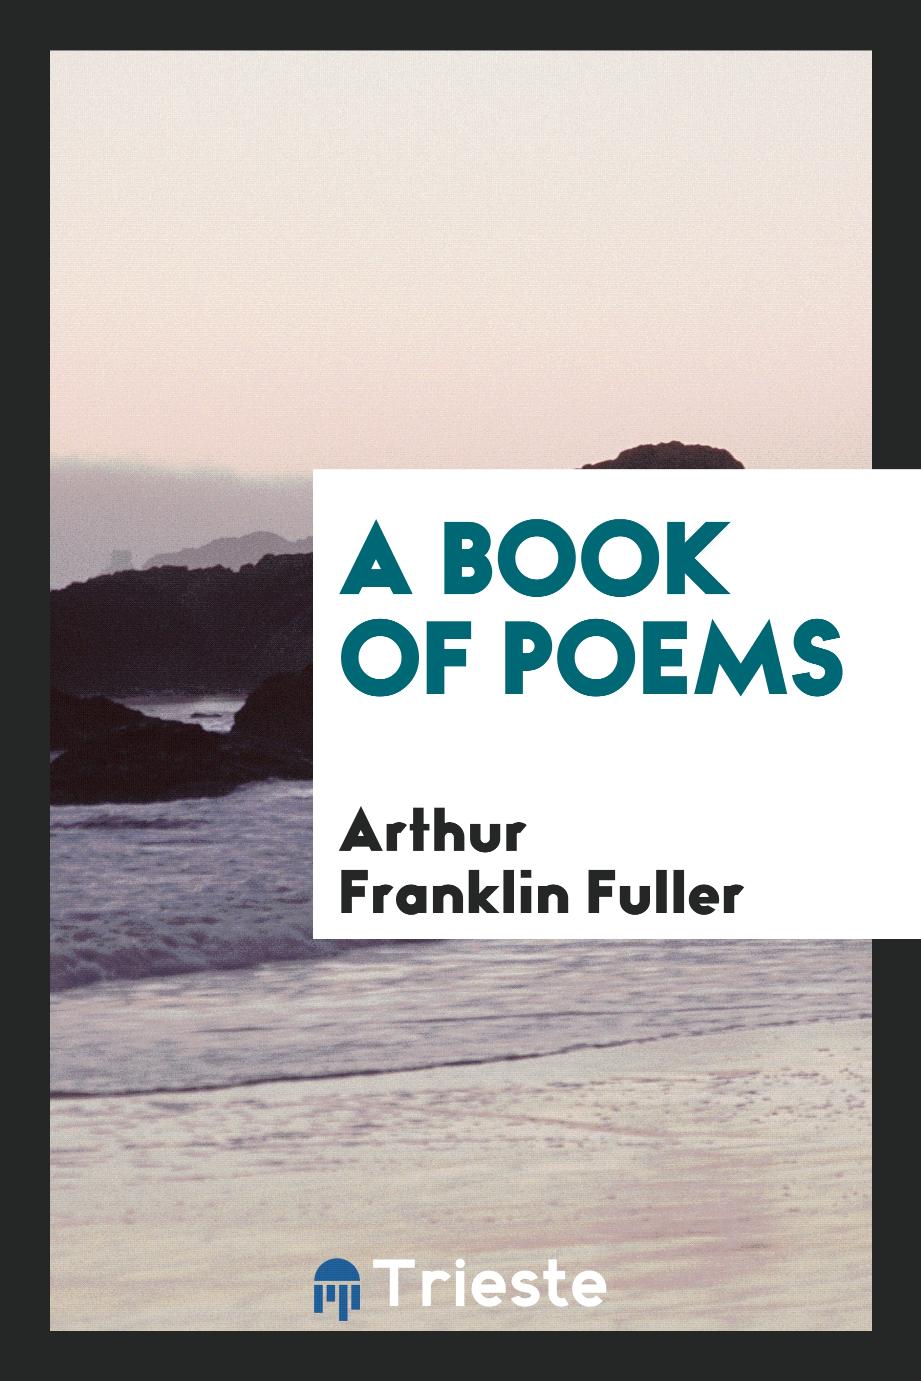 A book of poems